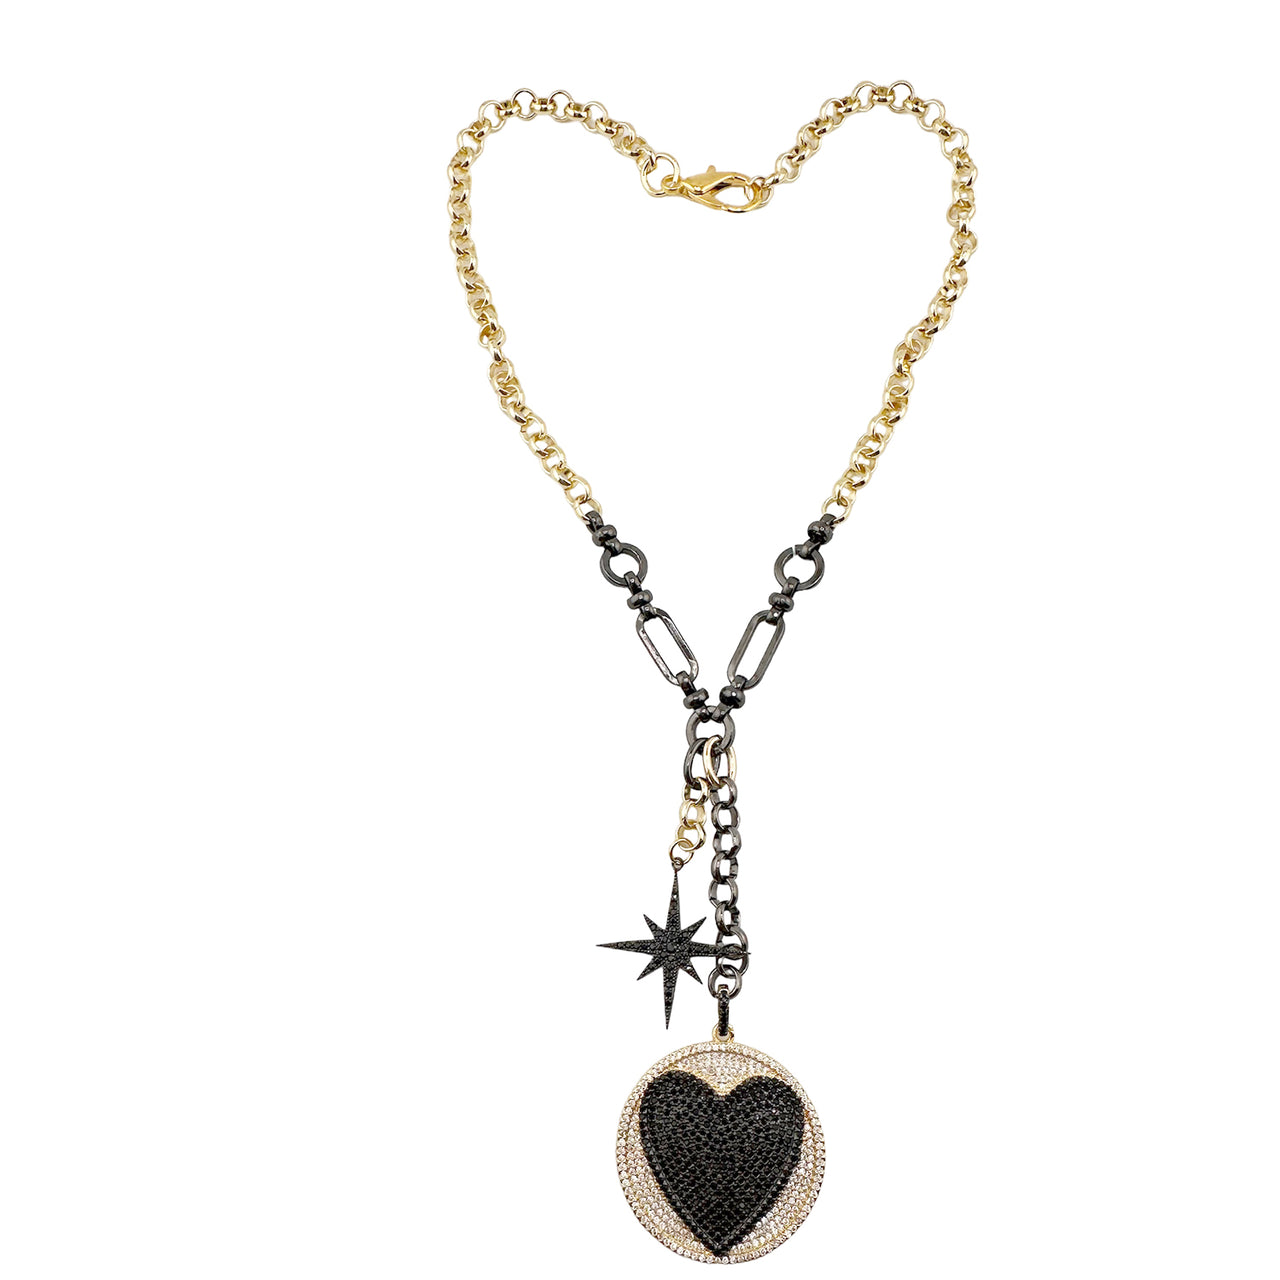 Molly Love Star Necklace